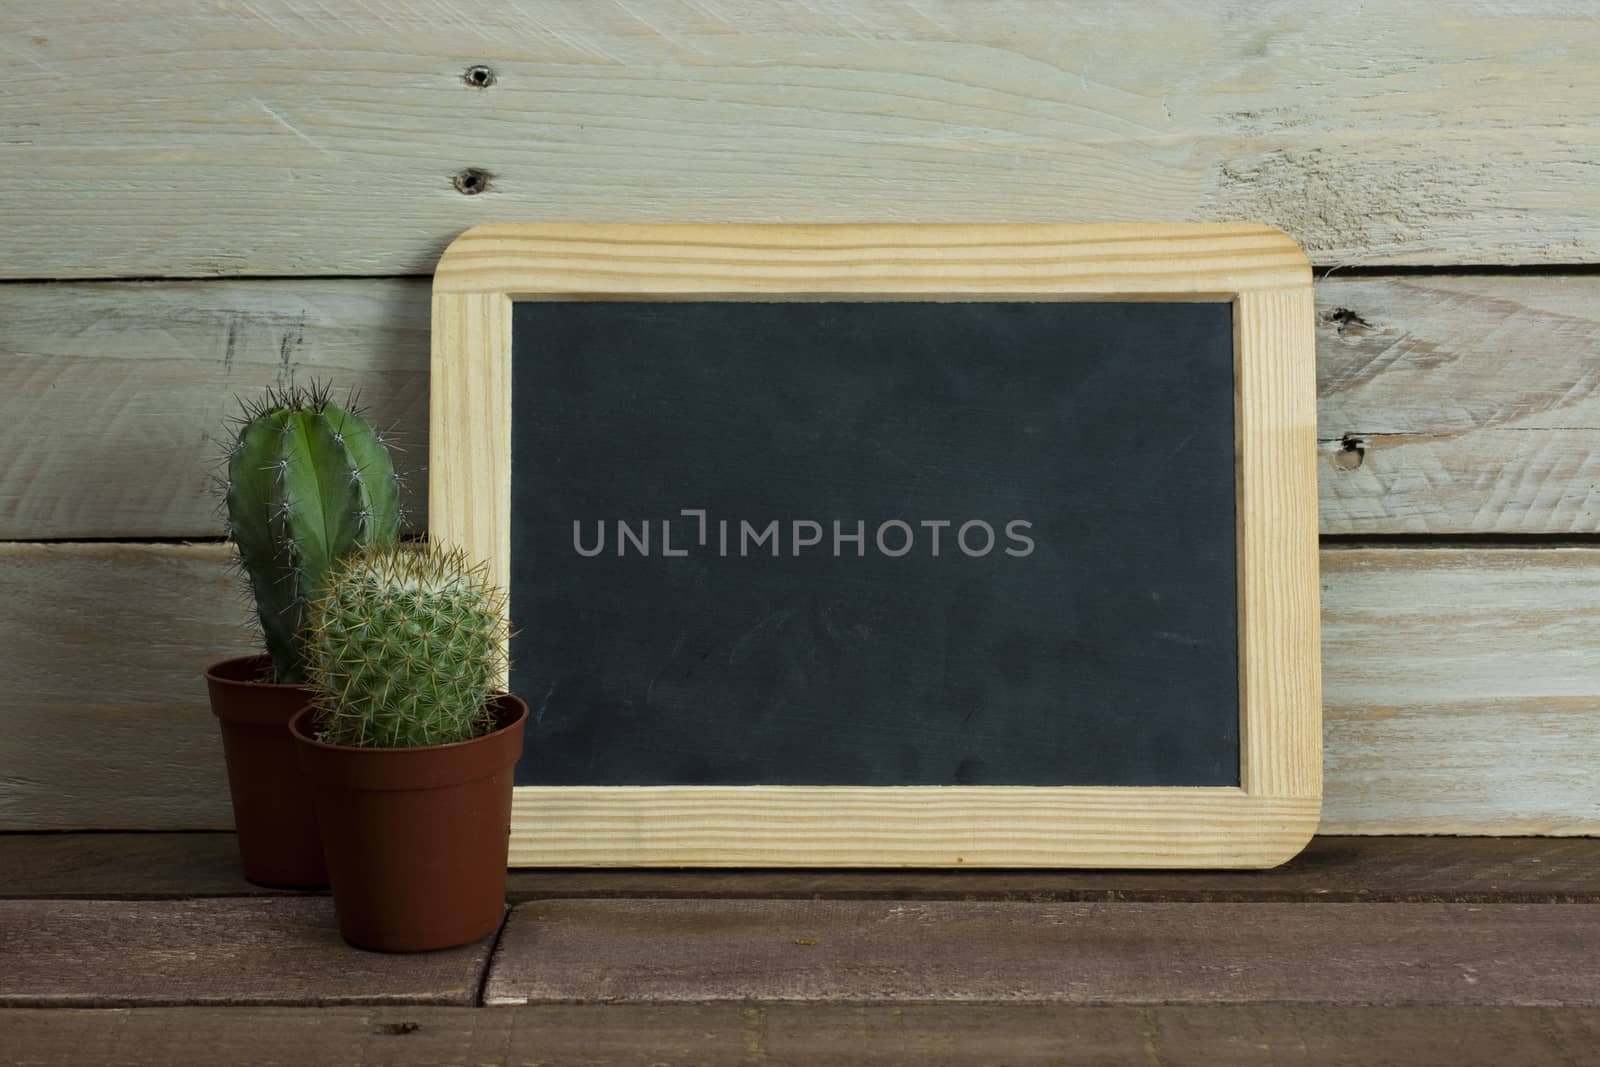 Cactus and blackboard set against a worn wooden background